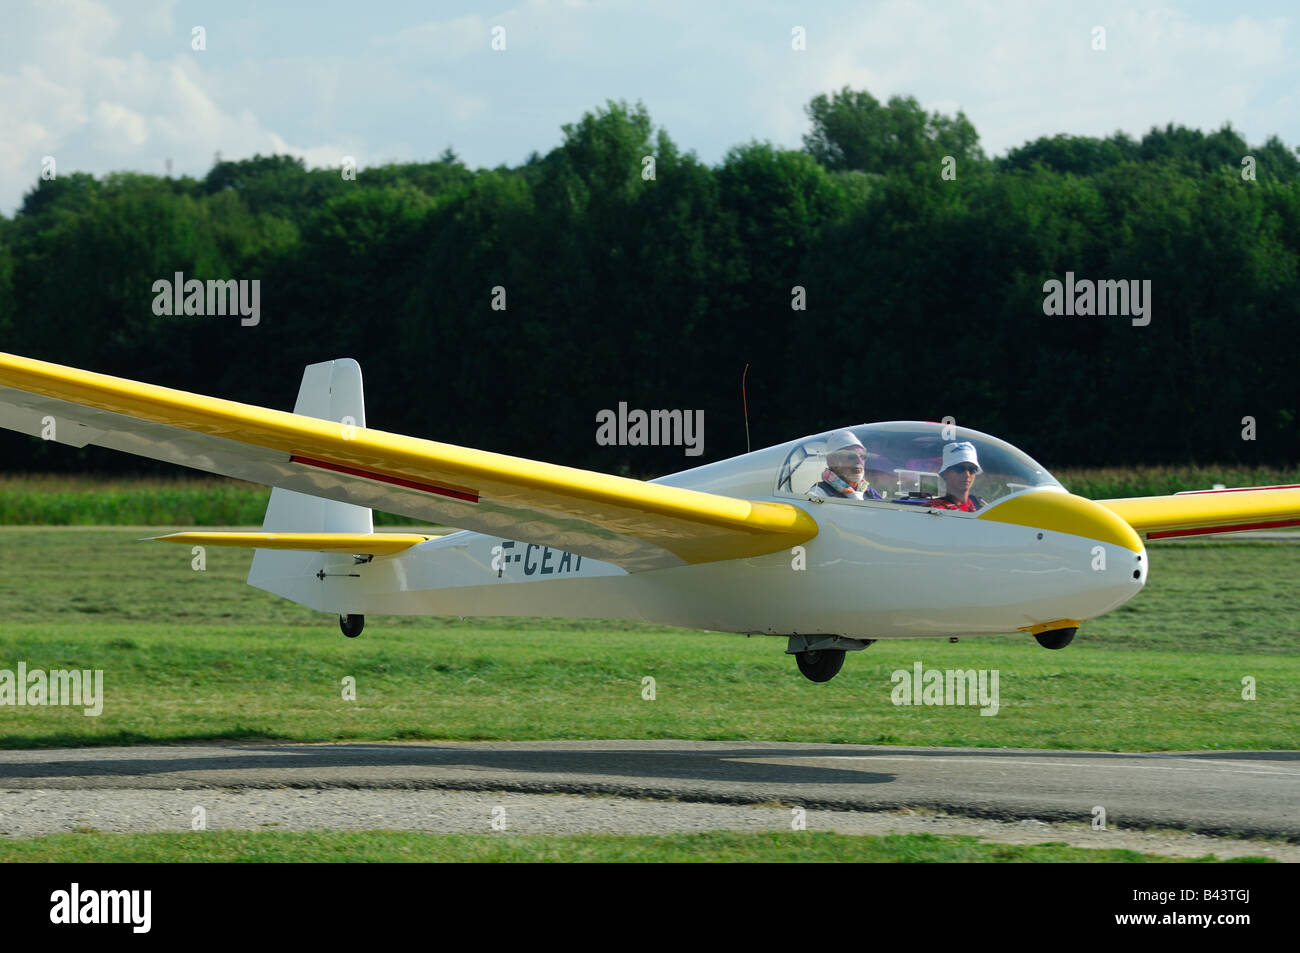 A trainer glider ASK-13 landing on runway airfield - France Stock Photo